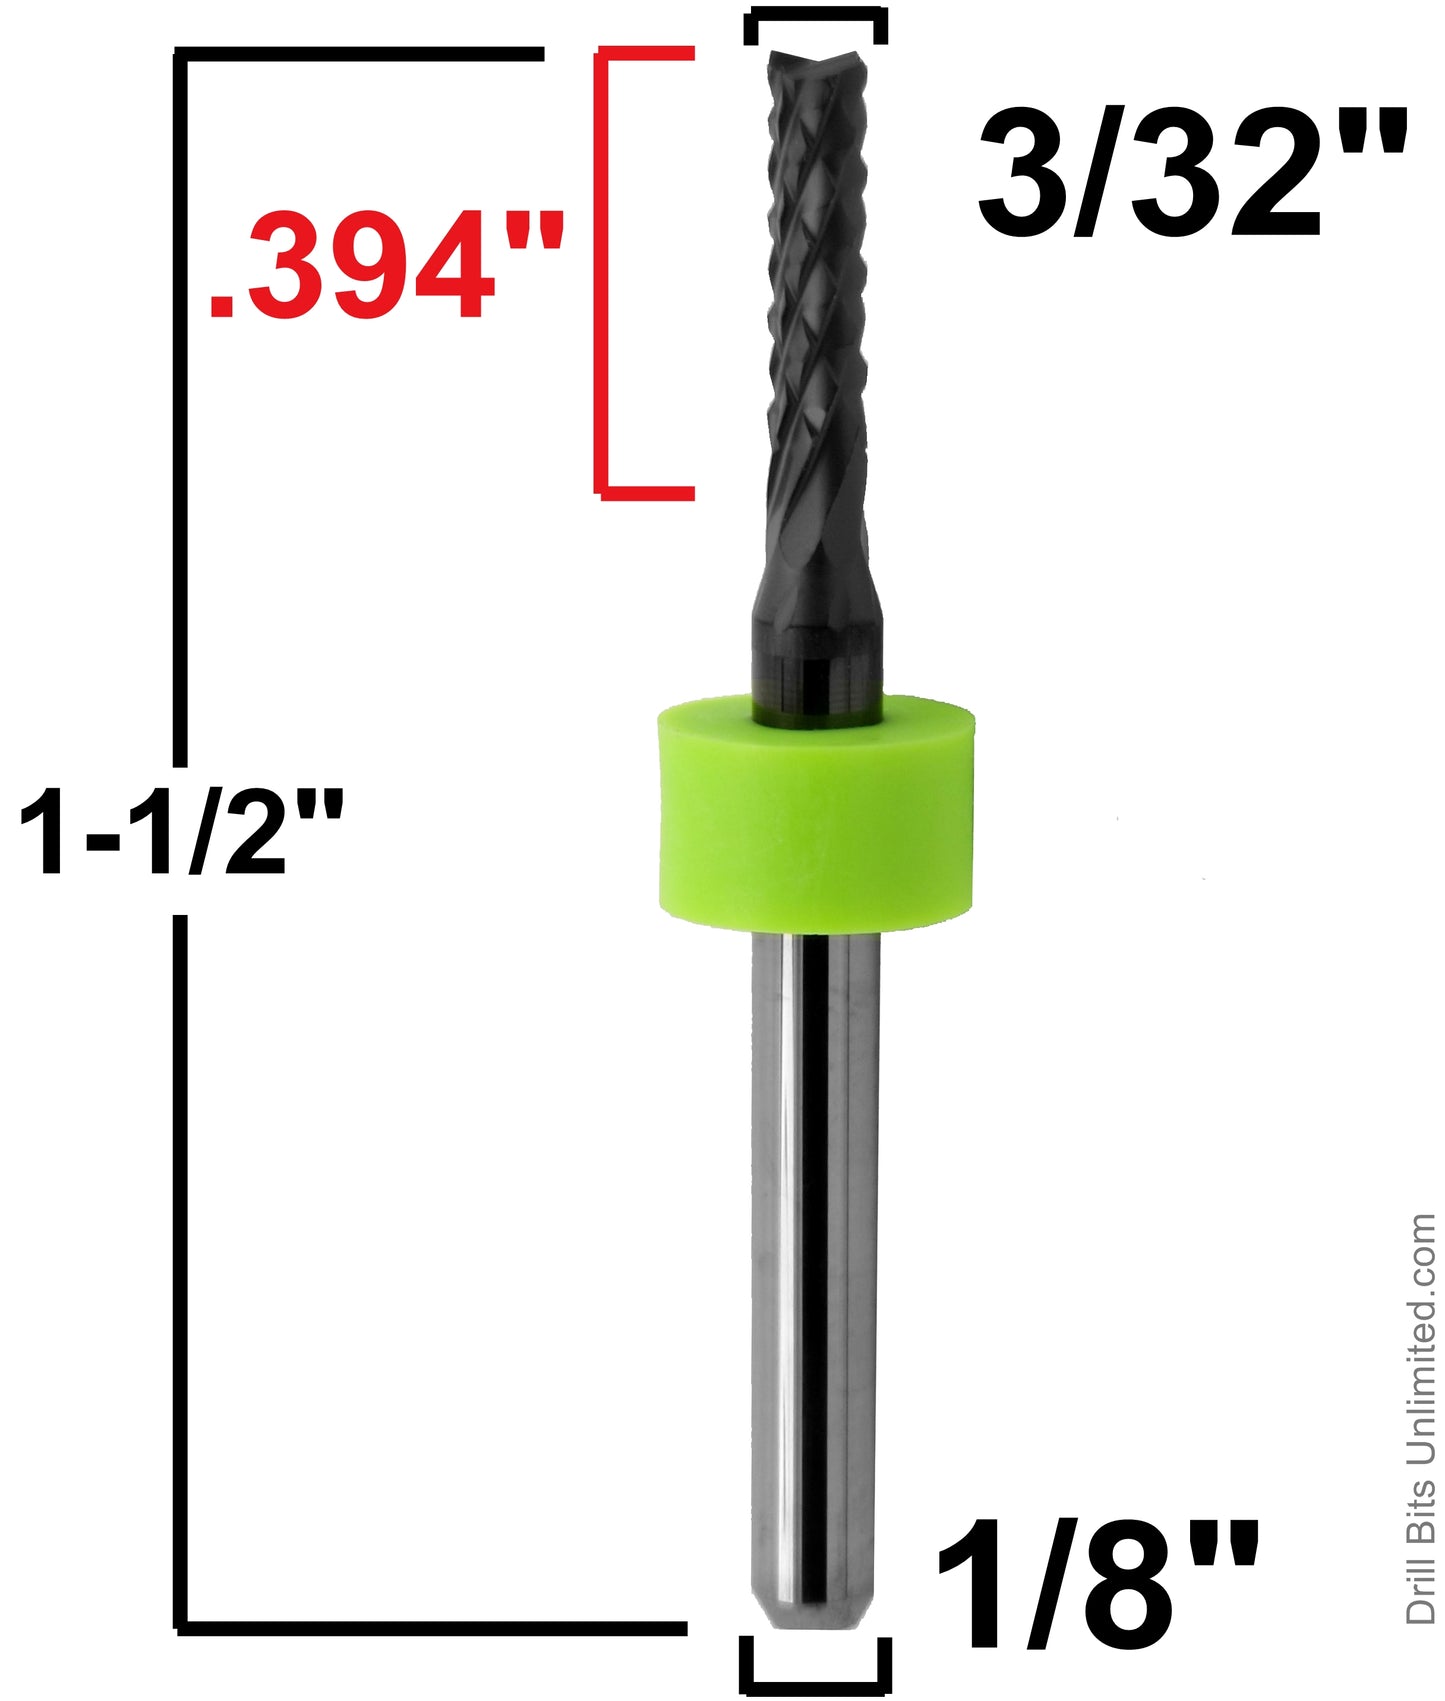 3/32" .094" 2.4mm PCD Diamond Coated Router Bit Fishtail Tip -  Carbon Fiber,  Graphite, Ceramic Hard and Abrasive Materials PCD332